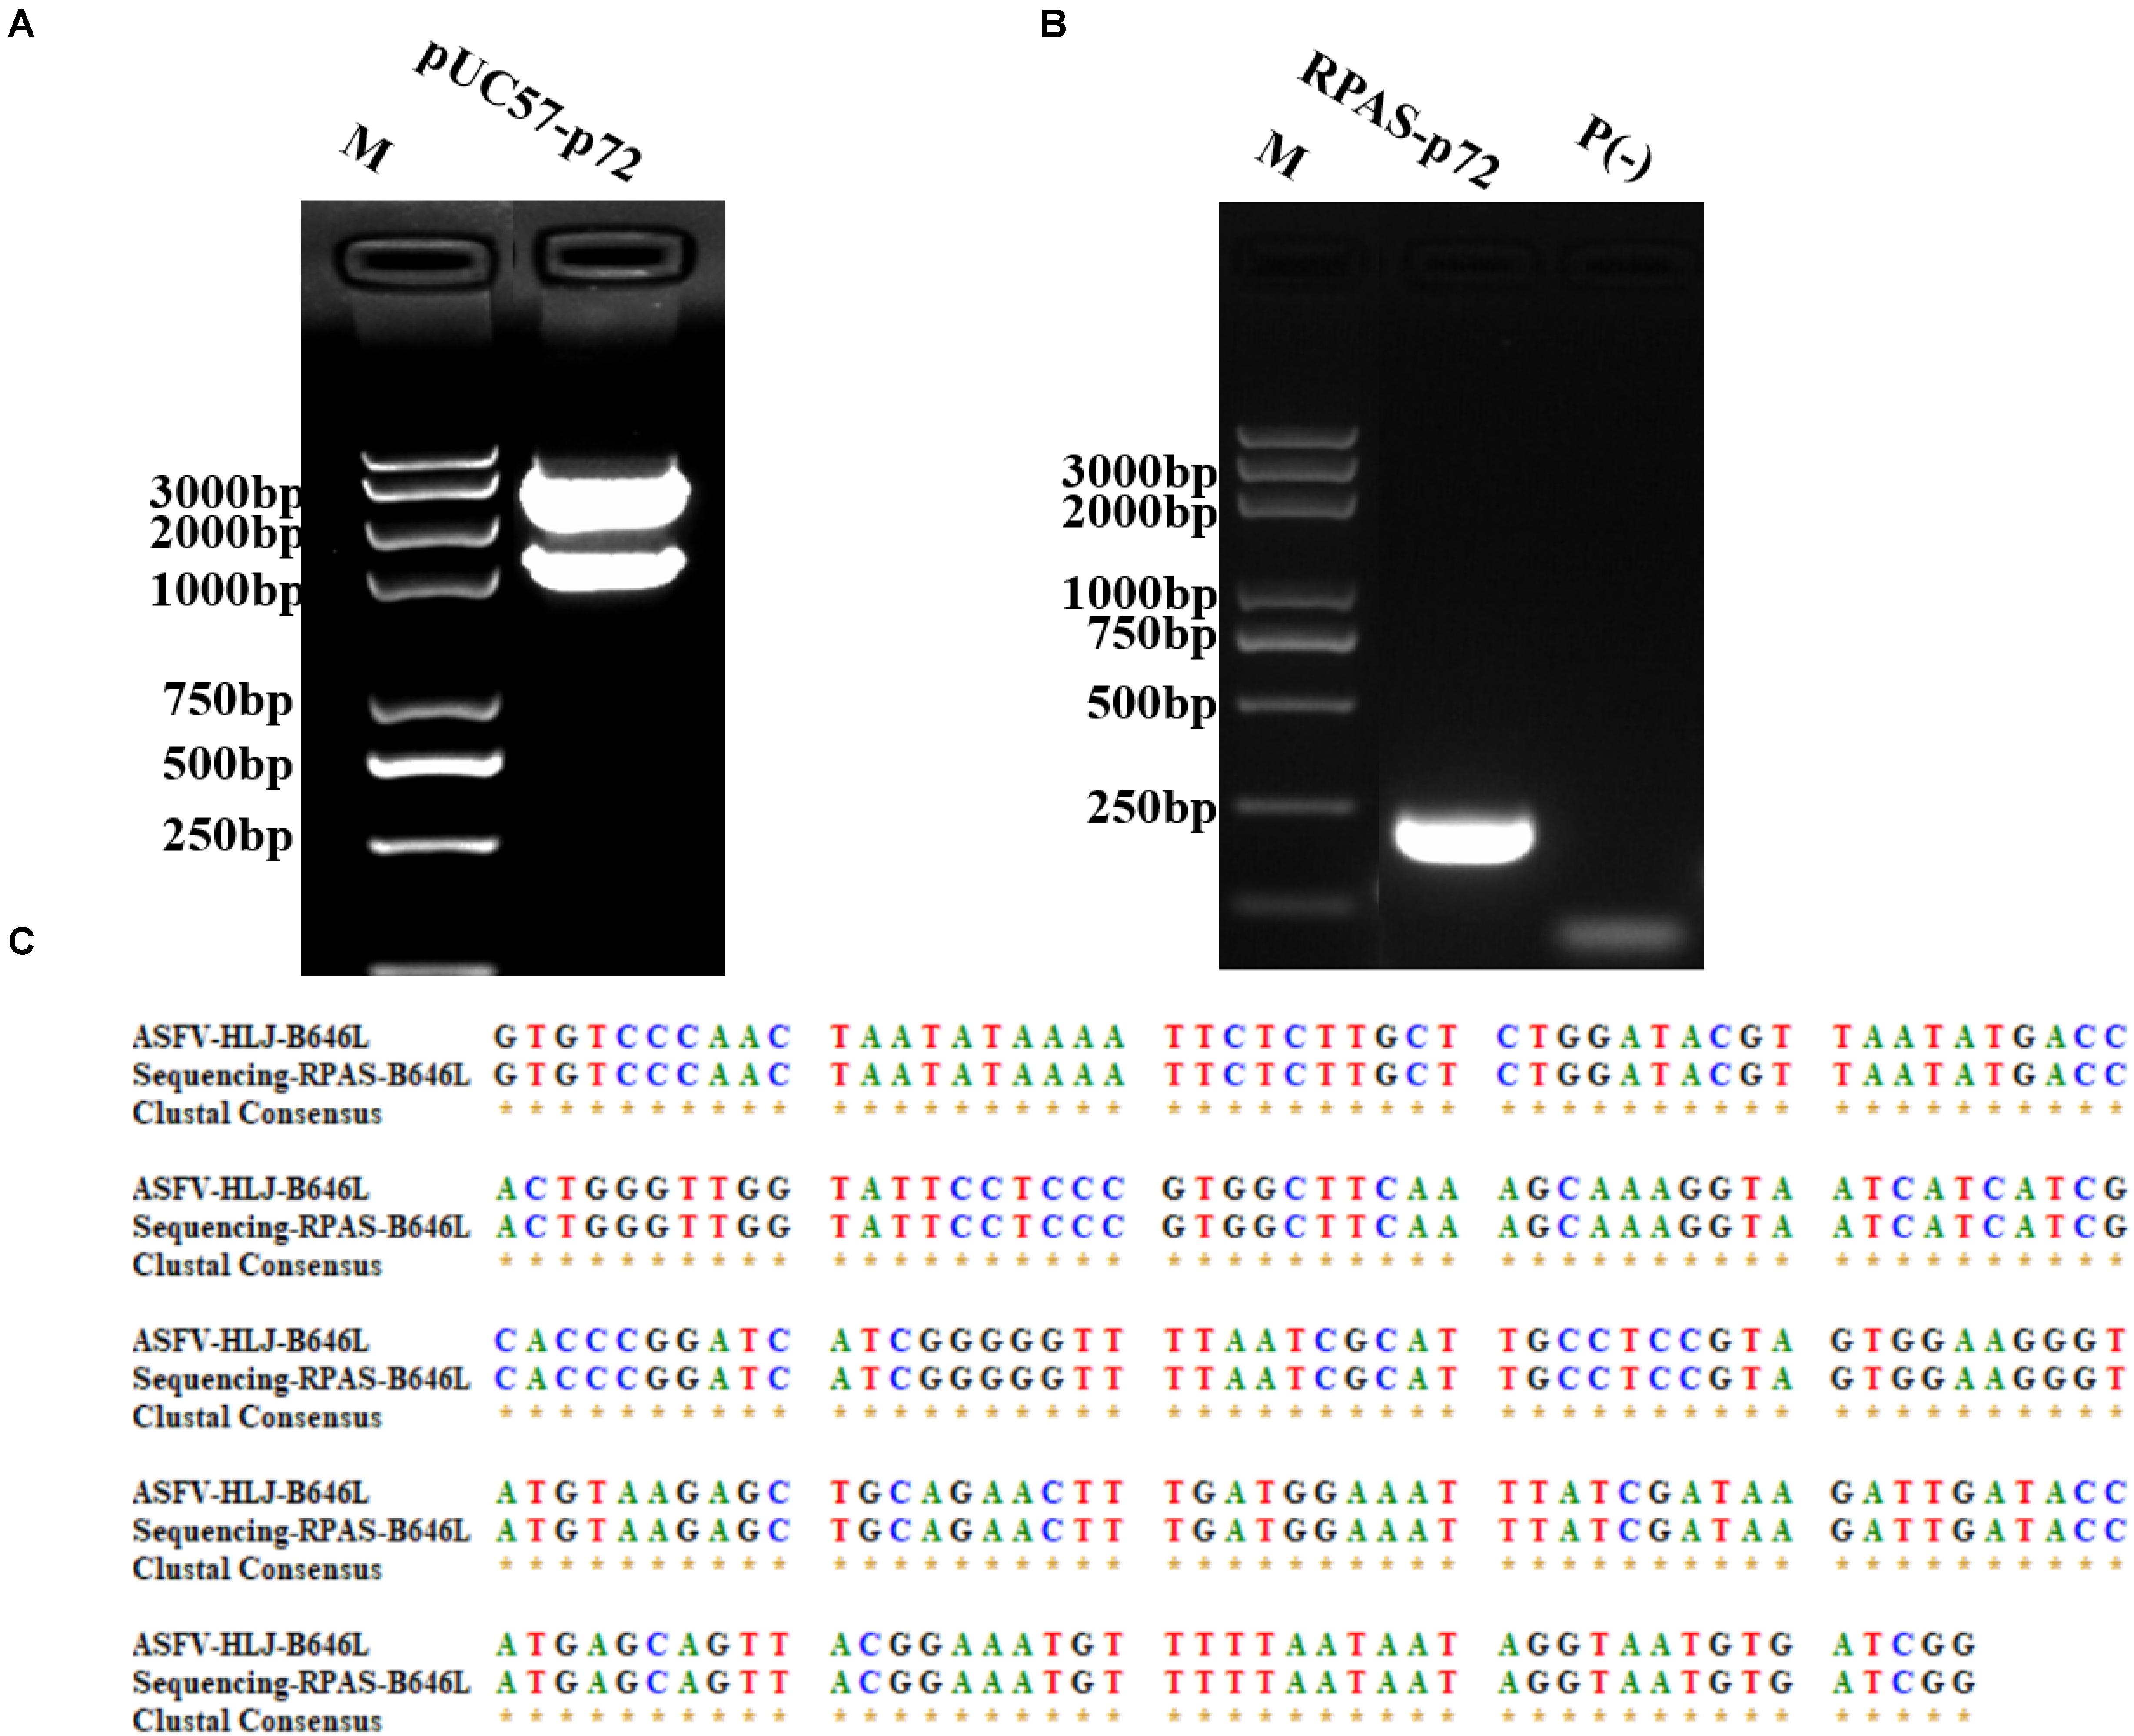 Frontiers Development Of A Directly Visualized Recombinase Polymerase Amplification Sybr Green I Method For The Rapid Detection Of African Swine Fever Virus Microbiology